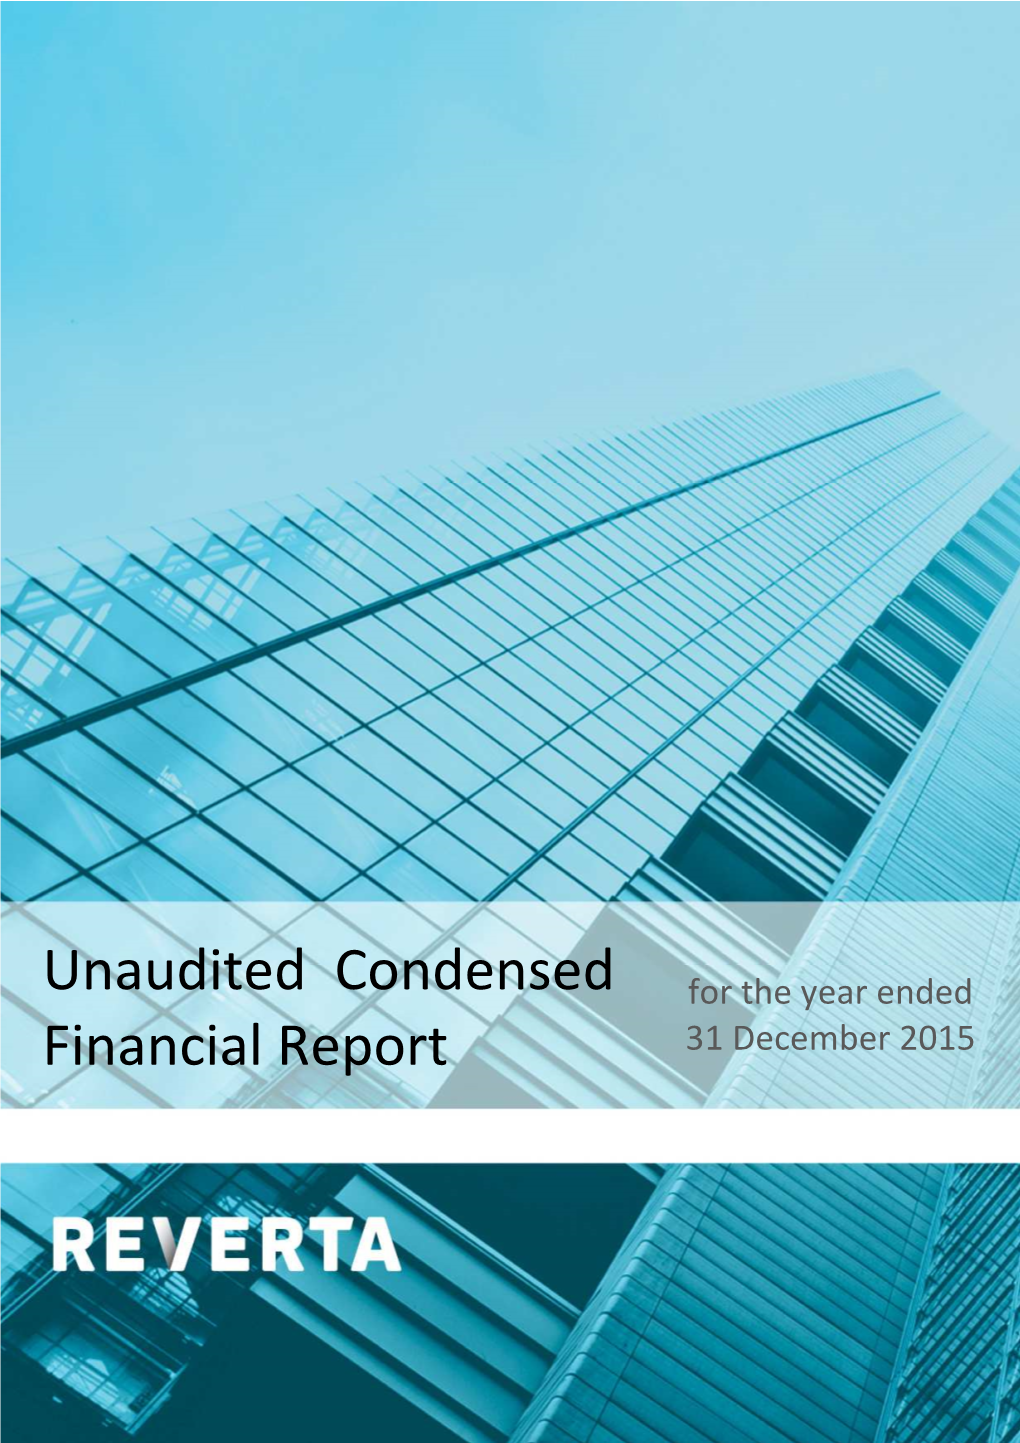 Unaudited Condensed Financial Report for the Year Ended 31 December 2015